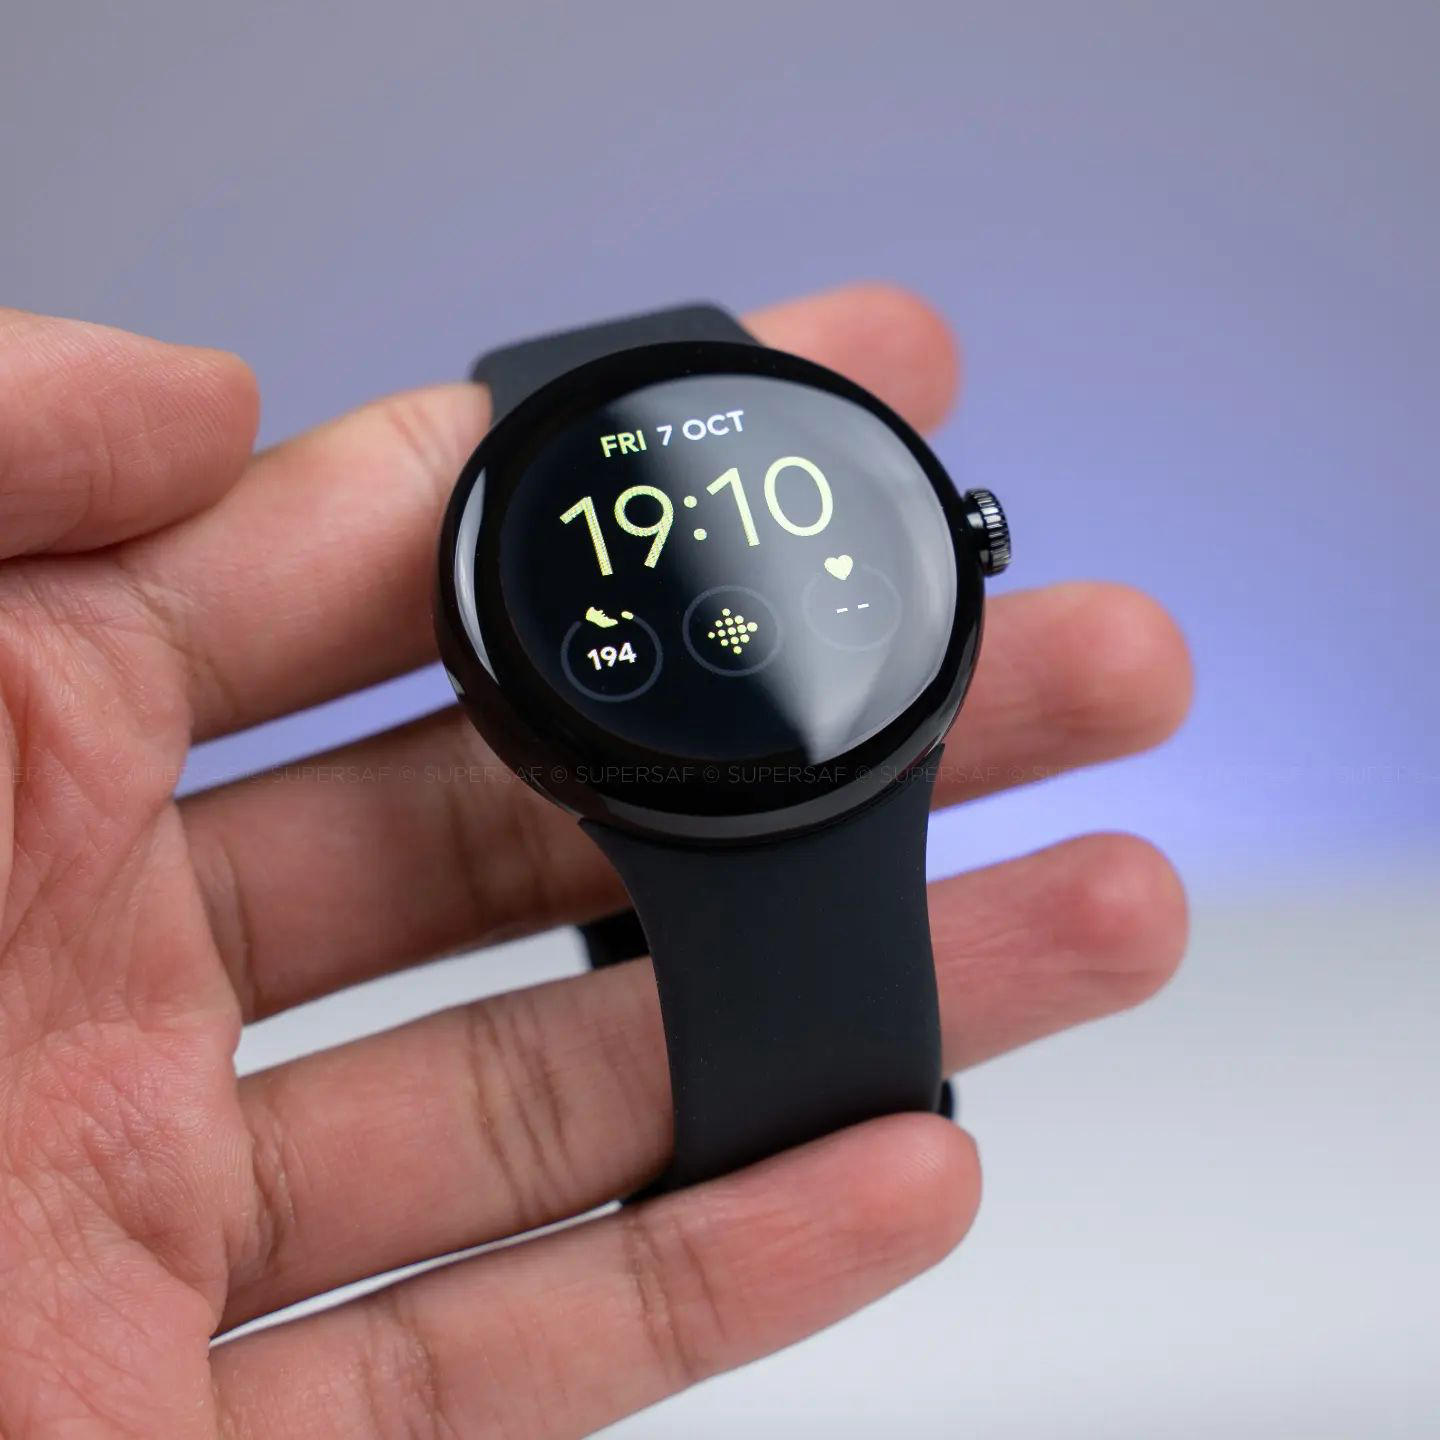 SuperSaf - This is one good looking smartwatch